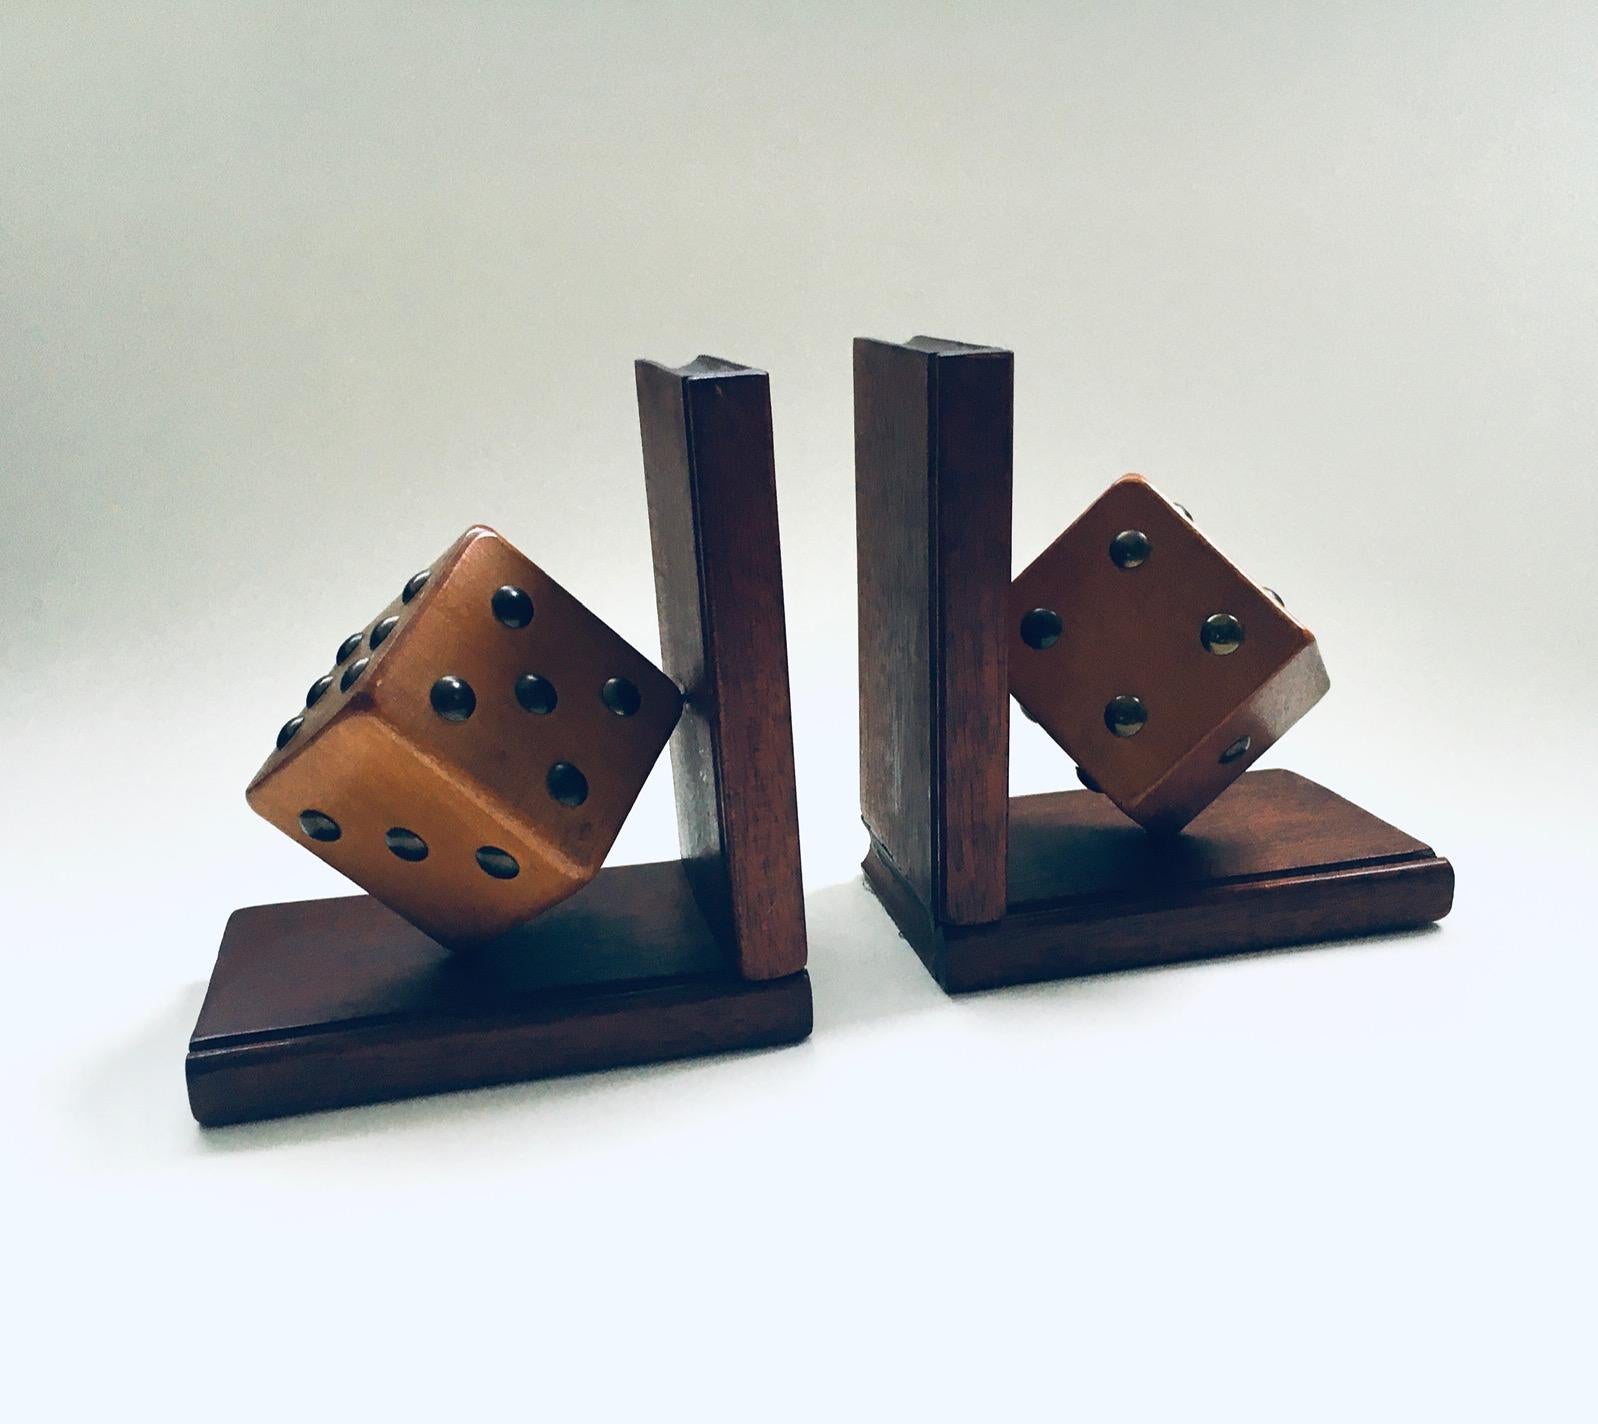 Vintage Art Deco Arts & Crafts period pair of wooden handcrafted Dice Bookends, made in Belgium 1920's. Rare and highly decorative pair of antique bookends. These handcrafted hand made bookends from the earliest years of the twentieth century are